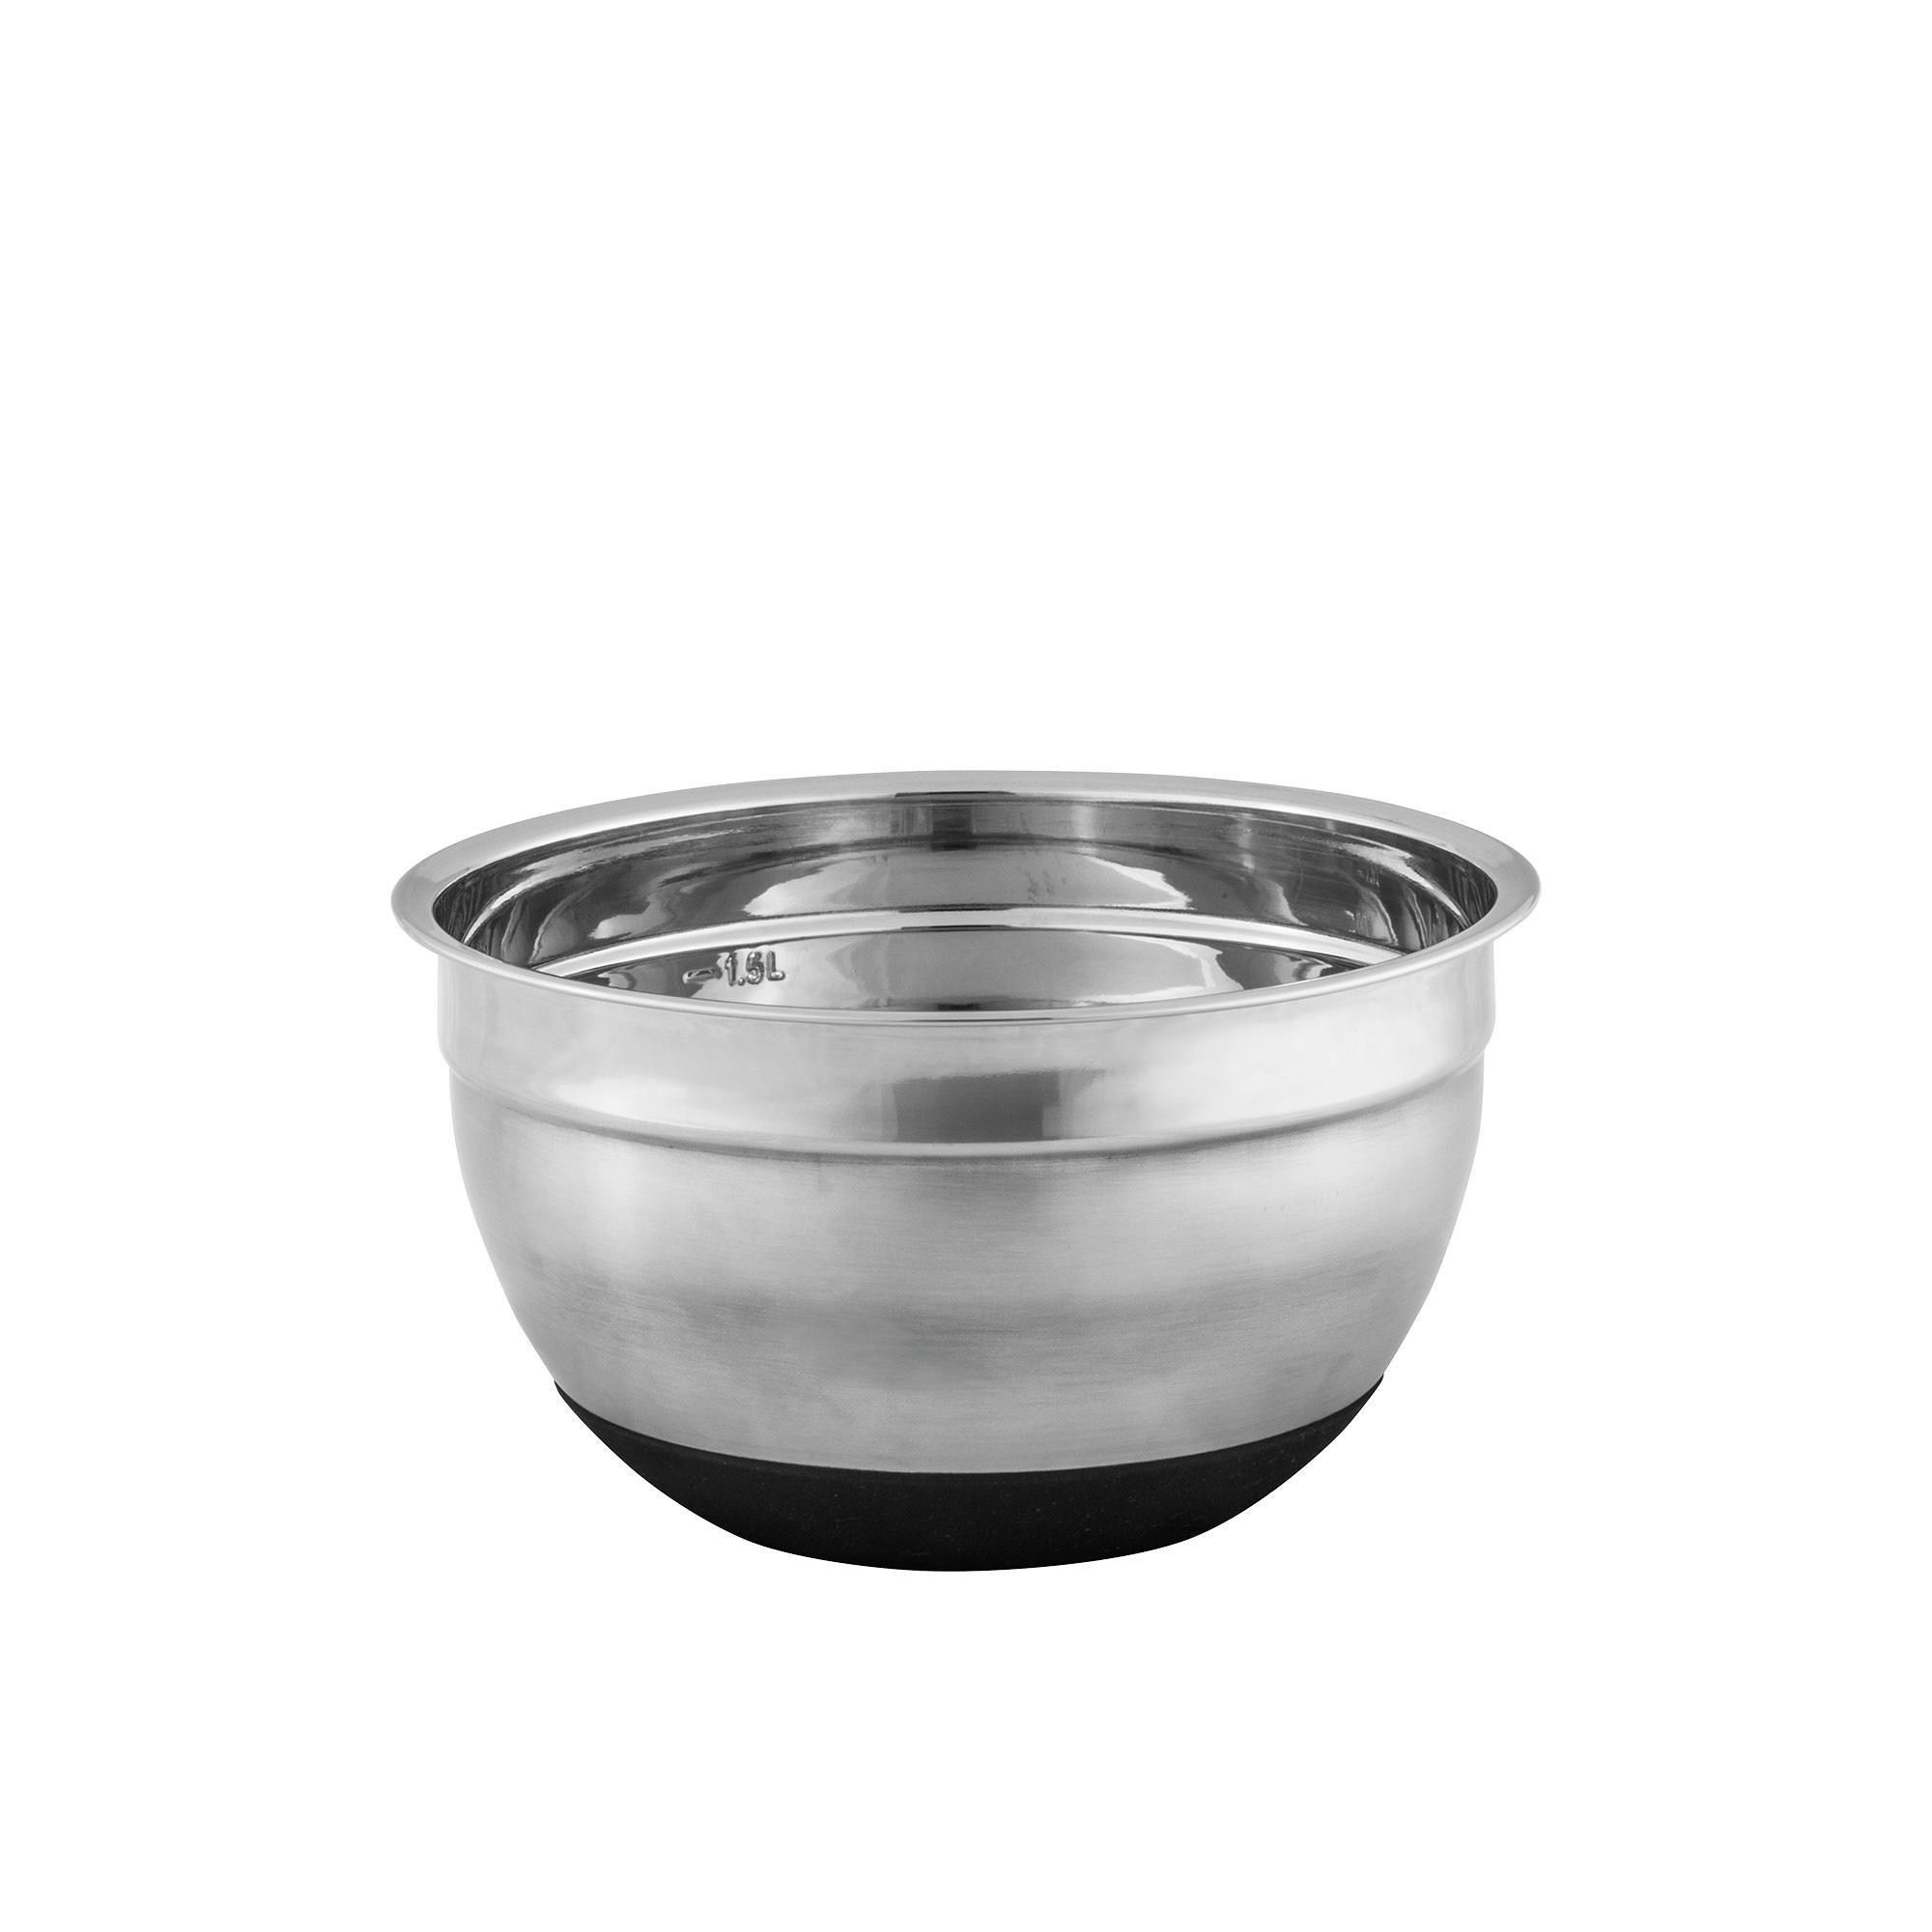 Avanti Stainless Steel Mixing Bowl with Silicone Bottom 18cm - 1.5L Image 1